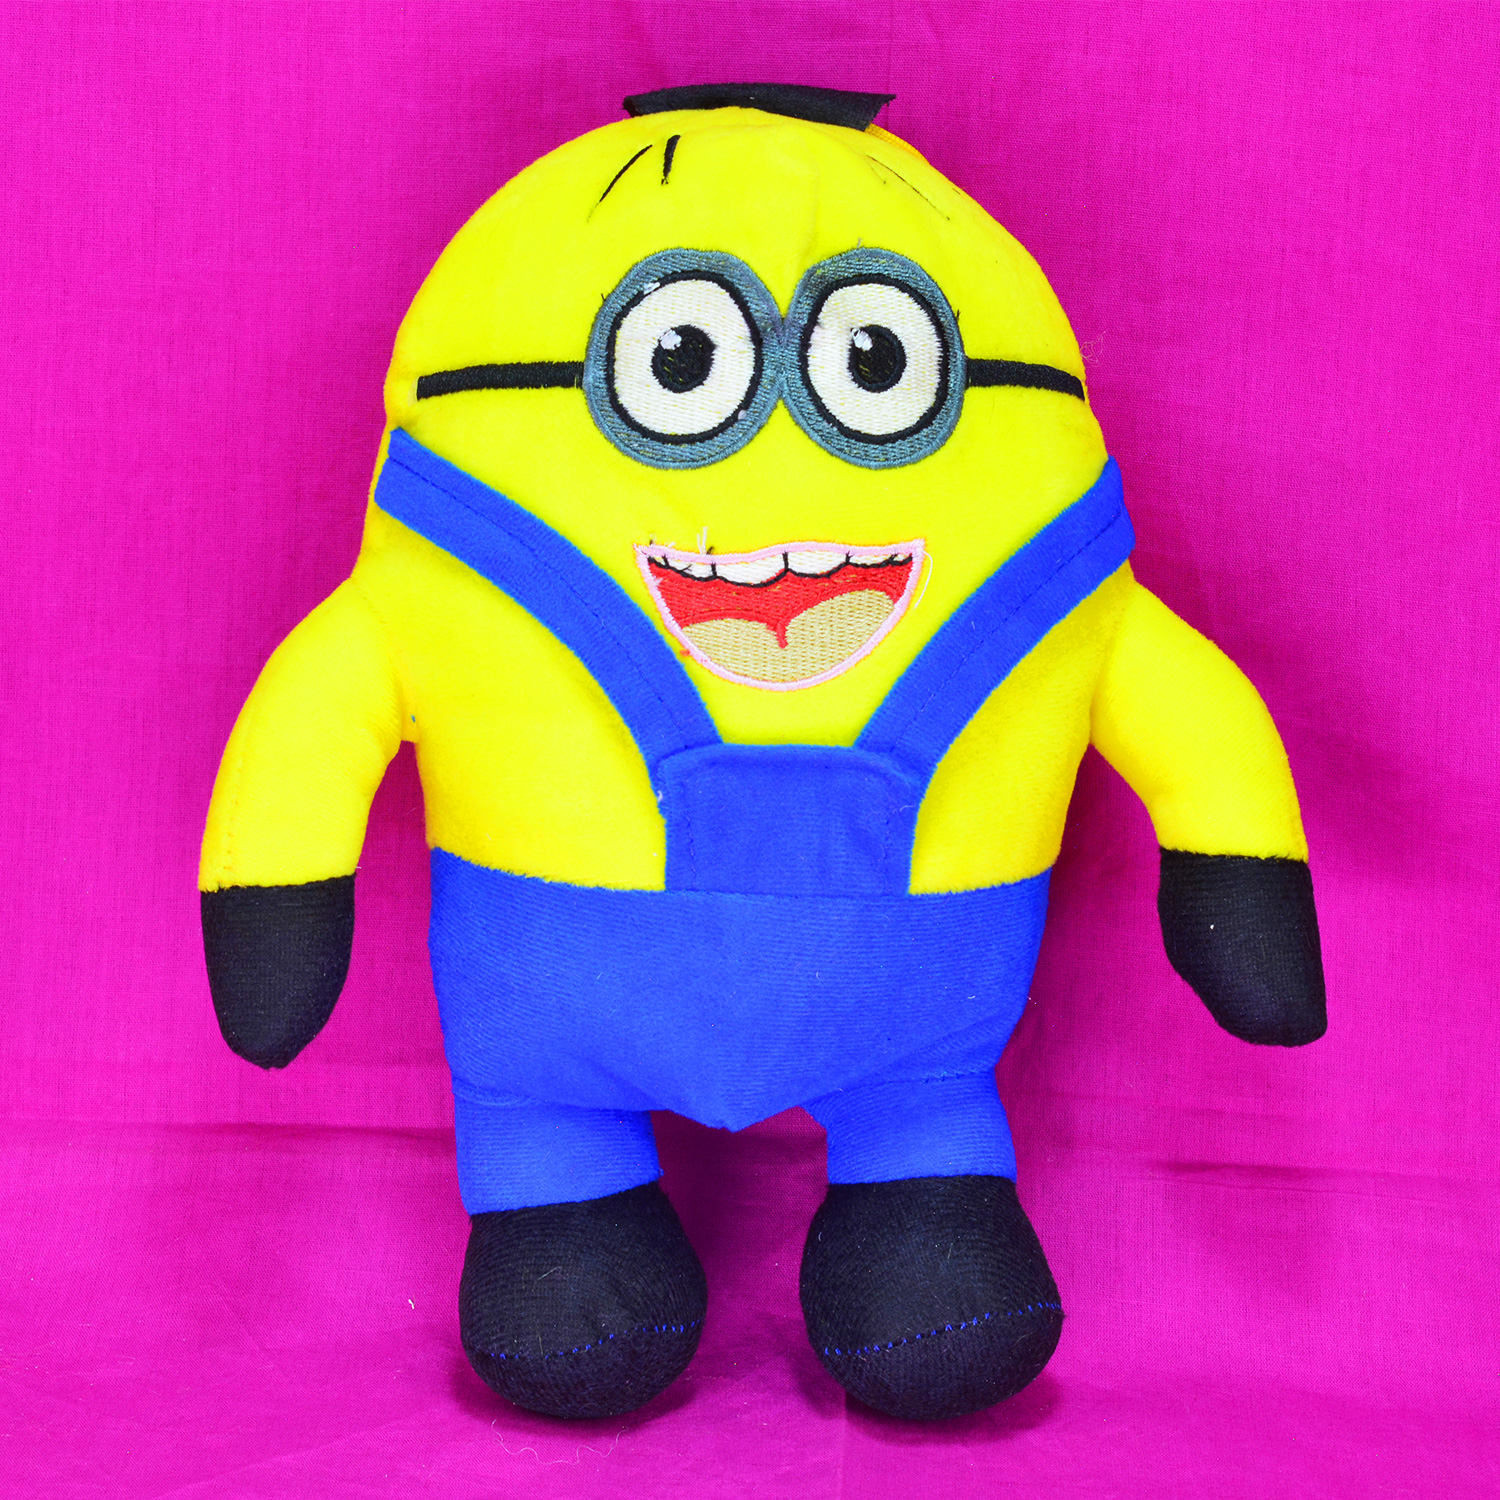 Soft Toy Smiling Minions Cartoon for Kids